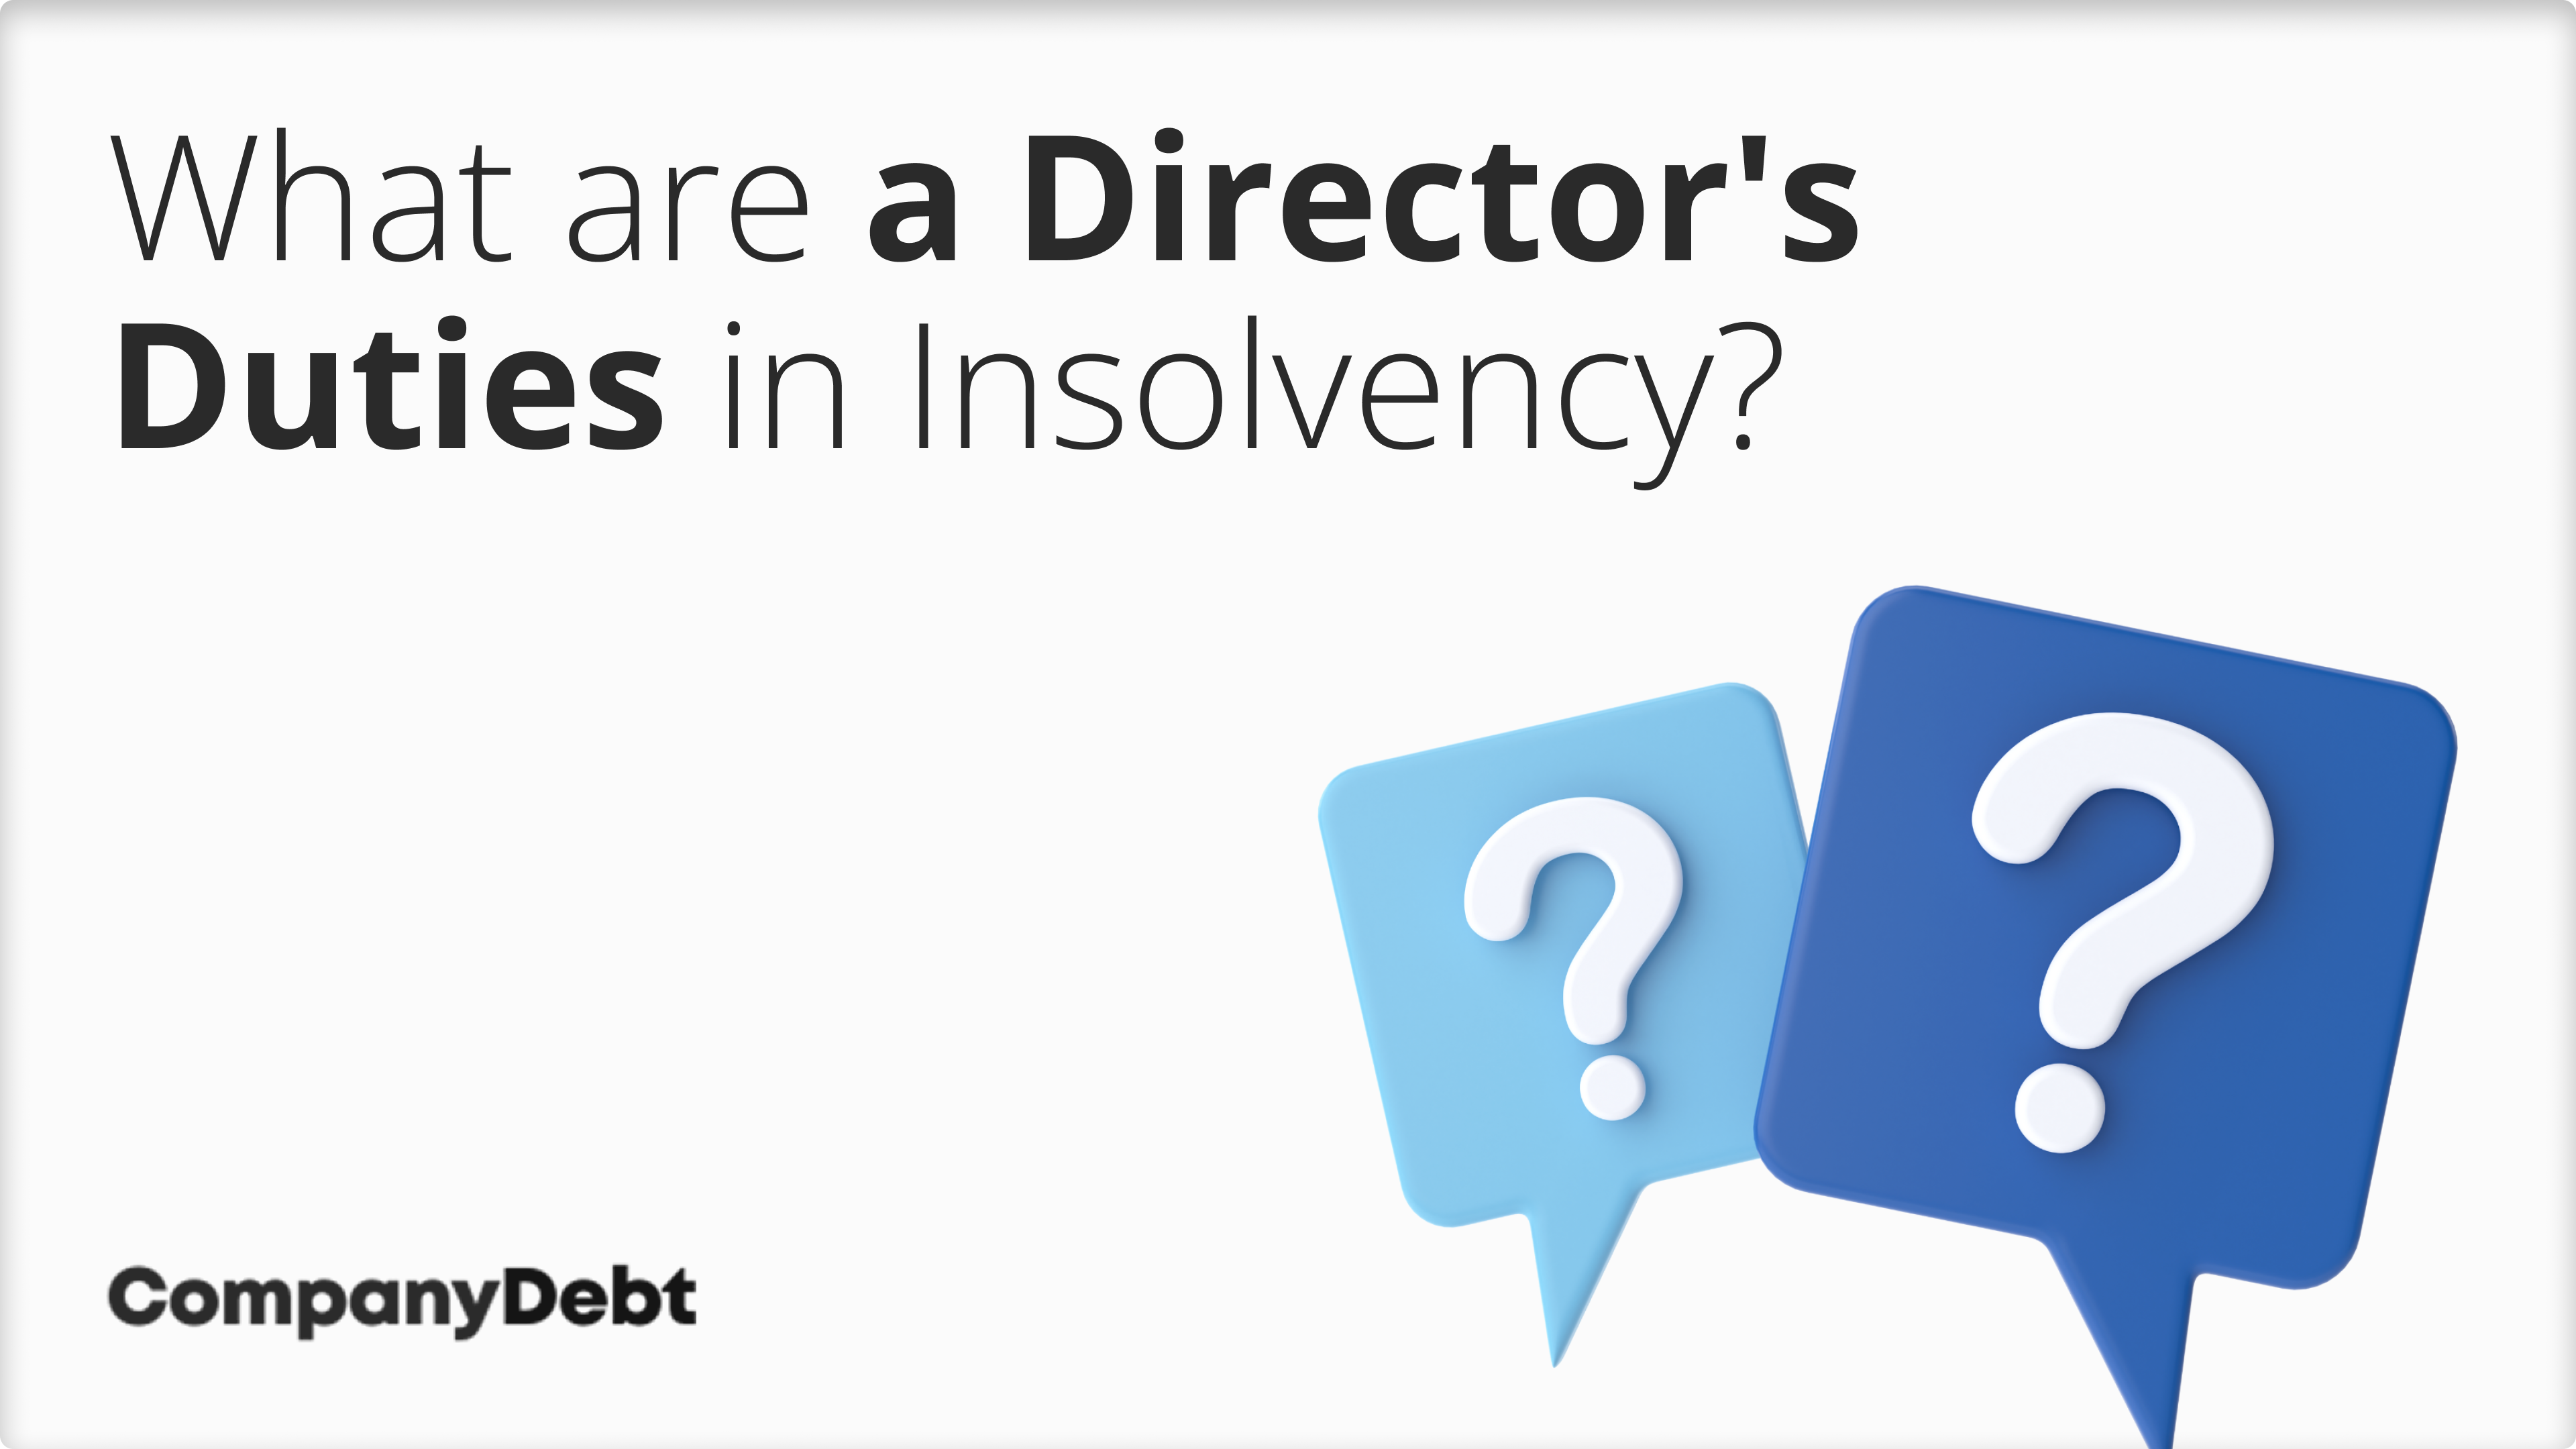 What are a Director's Duties in Insolvency?